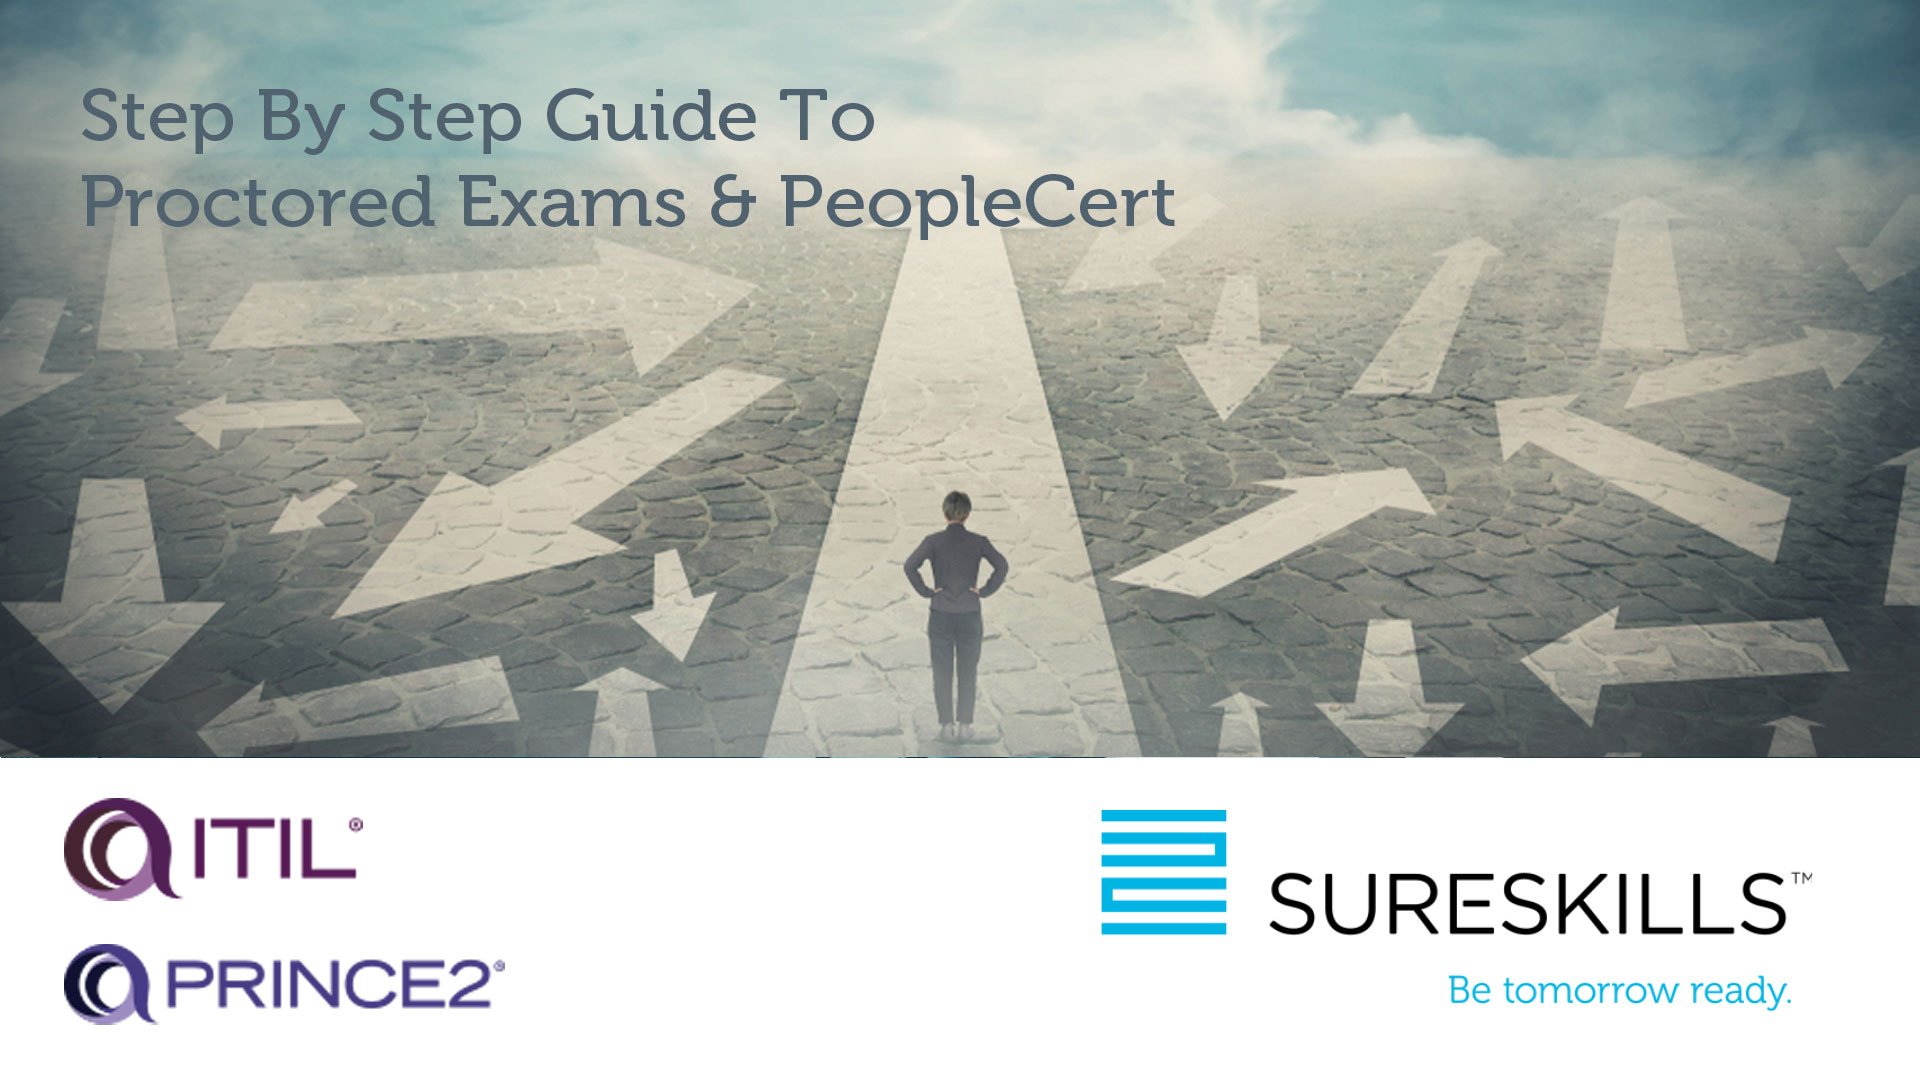 ITIL-PRINCE2-EXAM-Proctored-Guide-PeopleCert